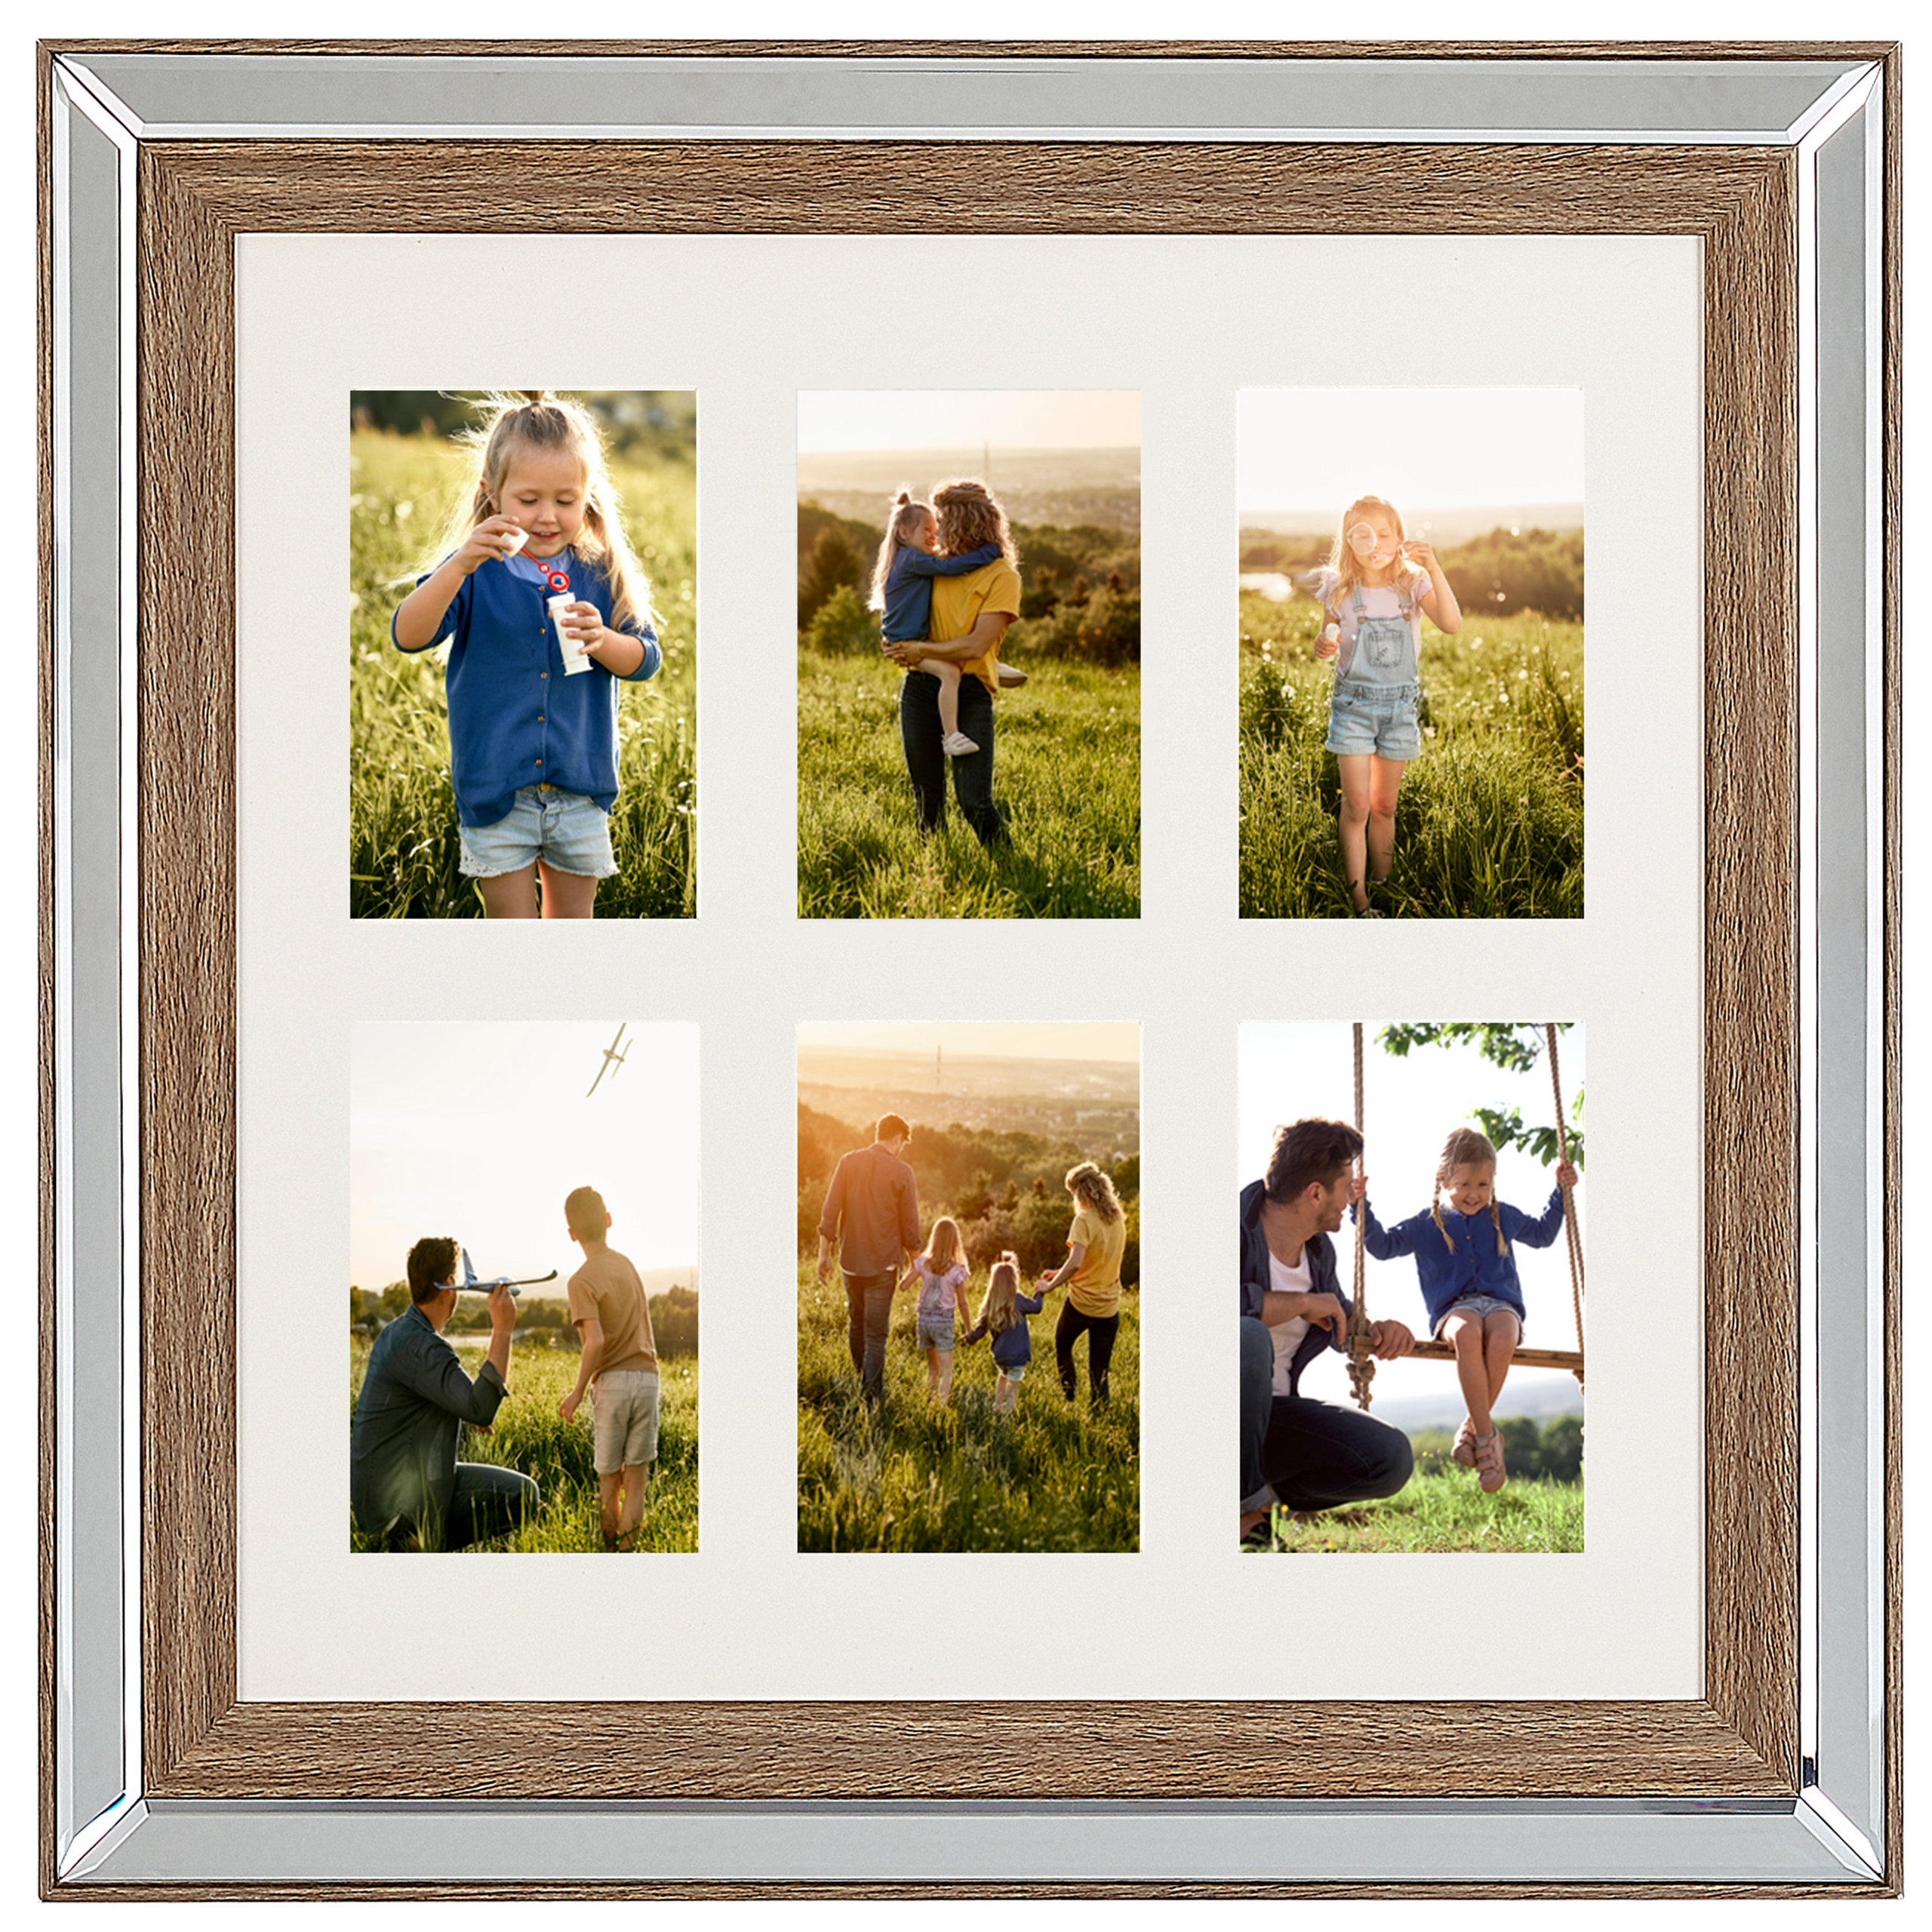 Beliani Photo Frame Dark Wood 50 x 50 cm for 6 Pictures 10 x 15 cm Collage Aperture